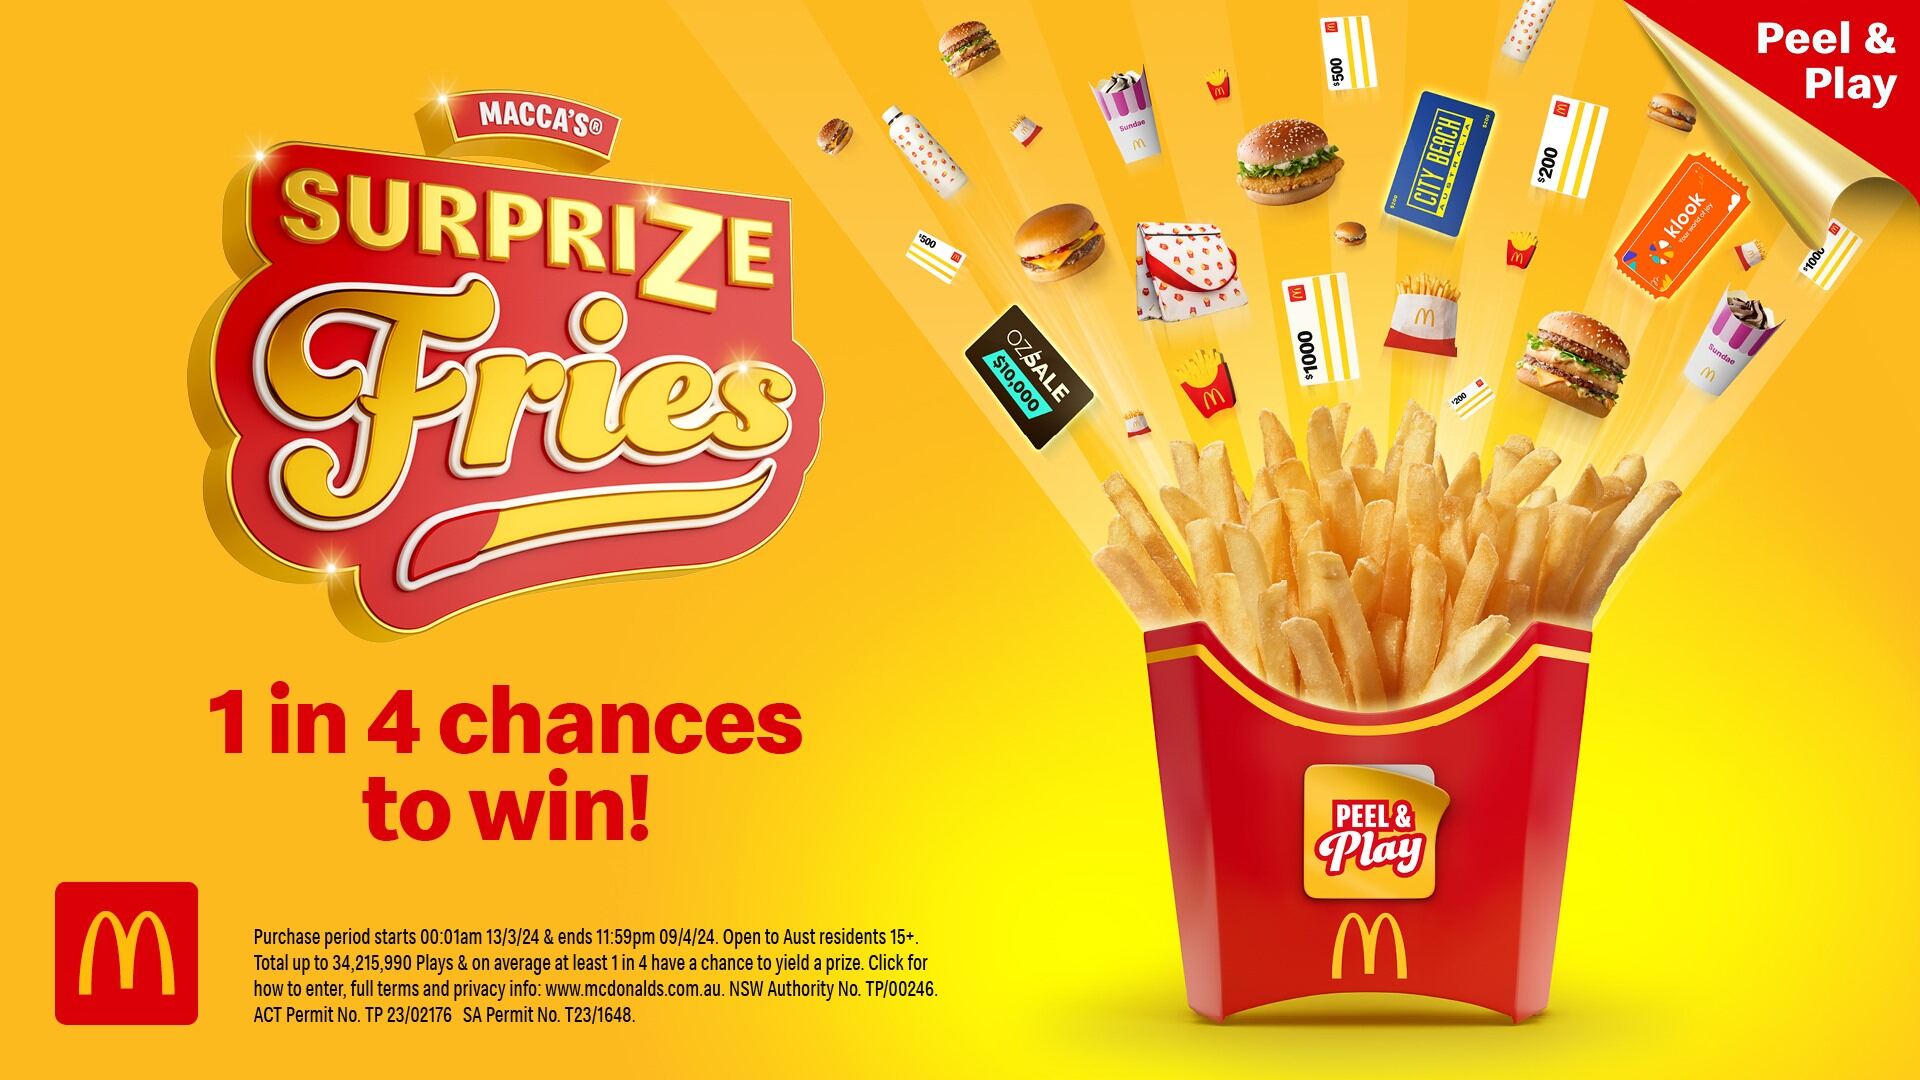 Poster of the Surprize Fries with the logo and a box of fries on the left with prizes flying out of the carton